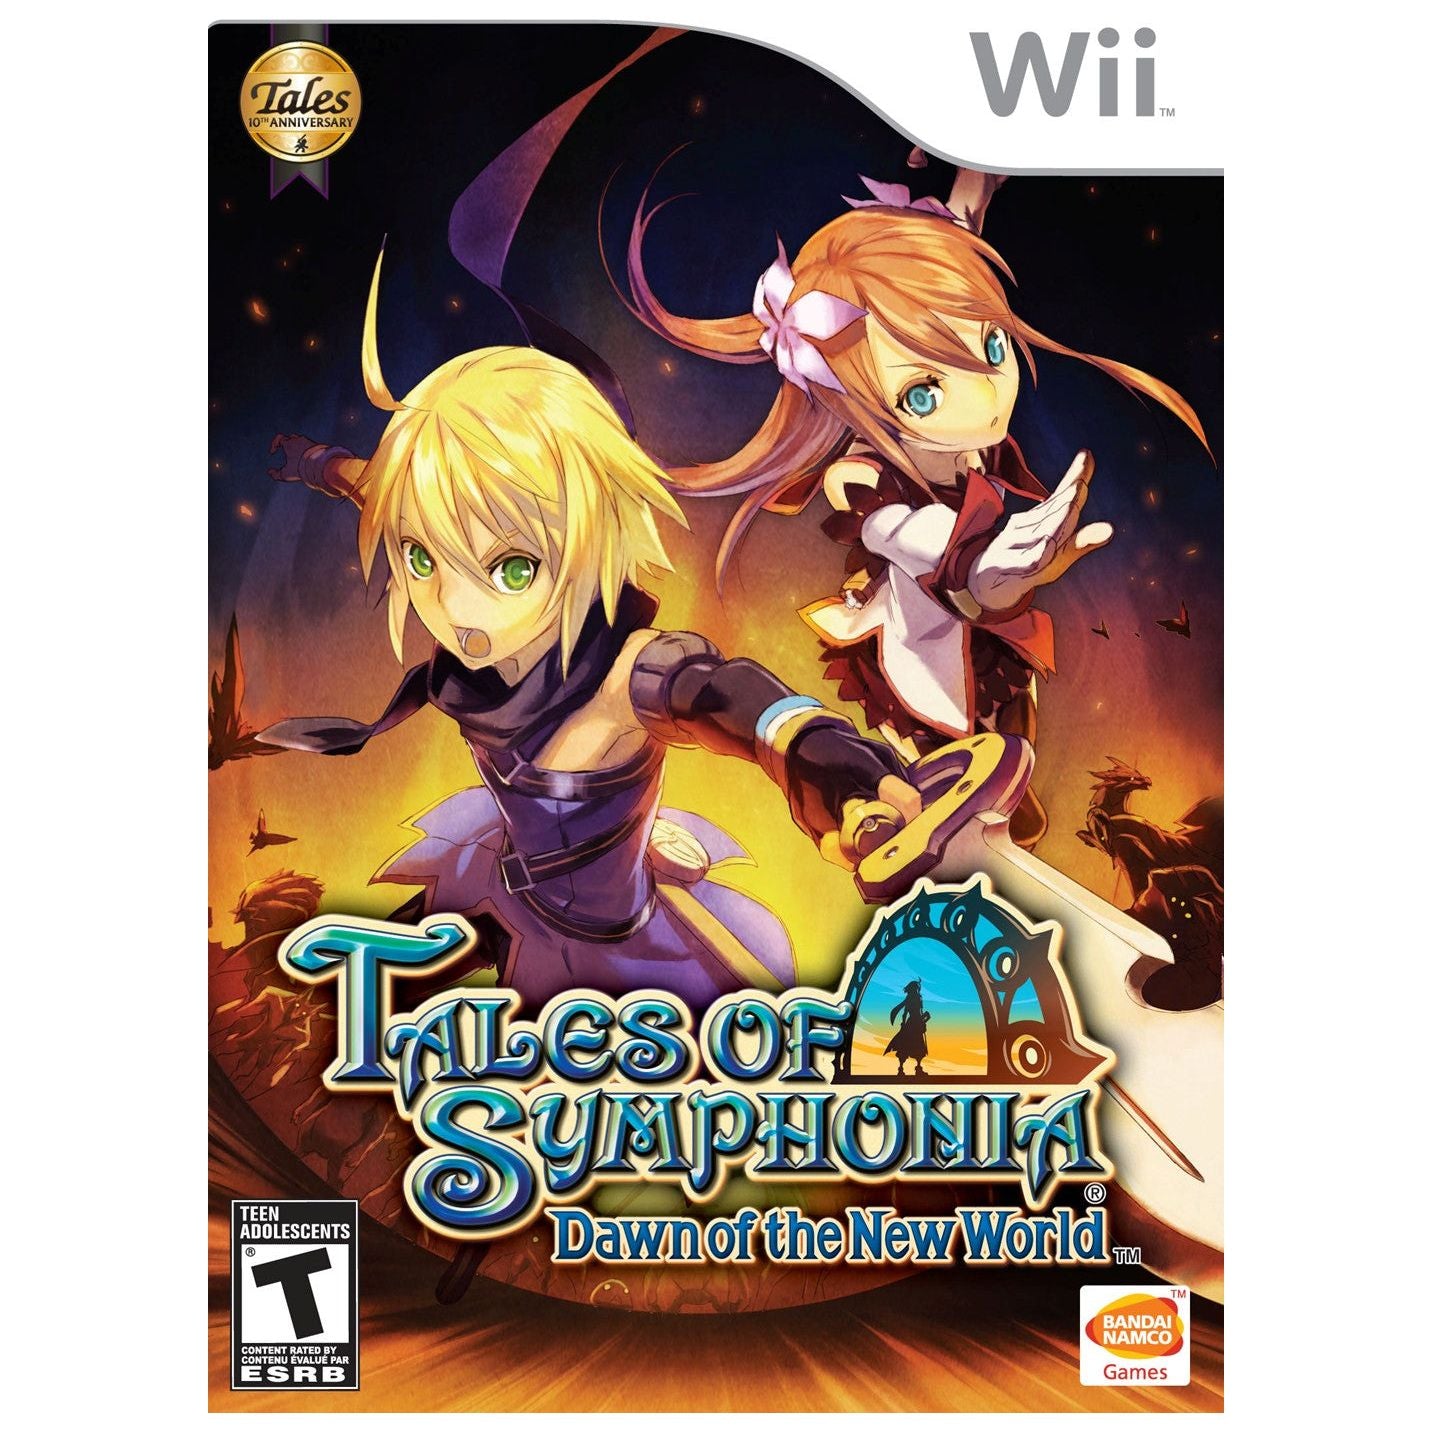 TALES OF SYMPHONIA DAWN OF THE NEW WORLD (used)